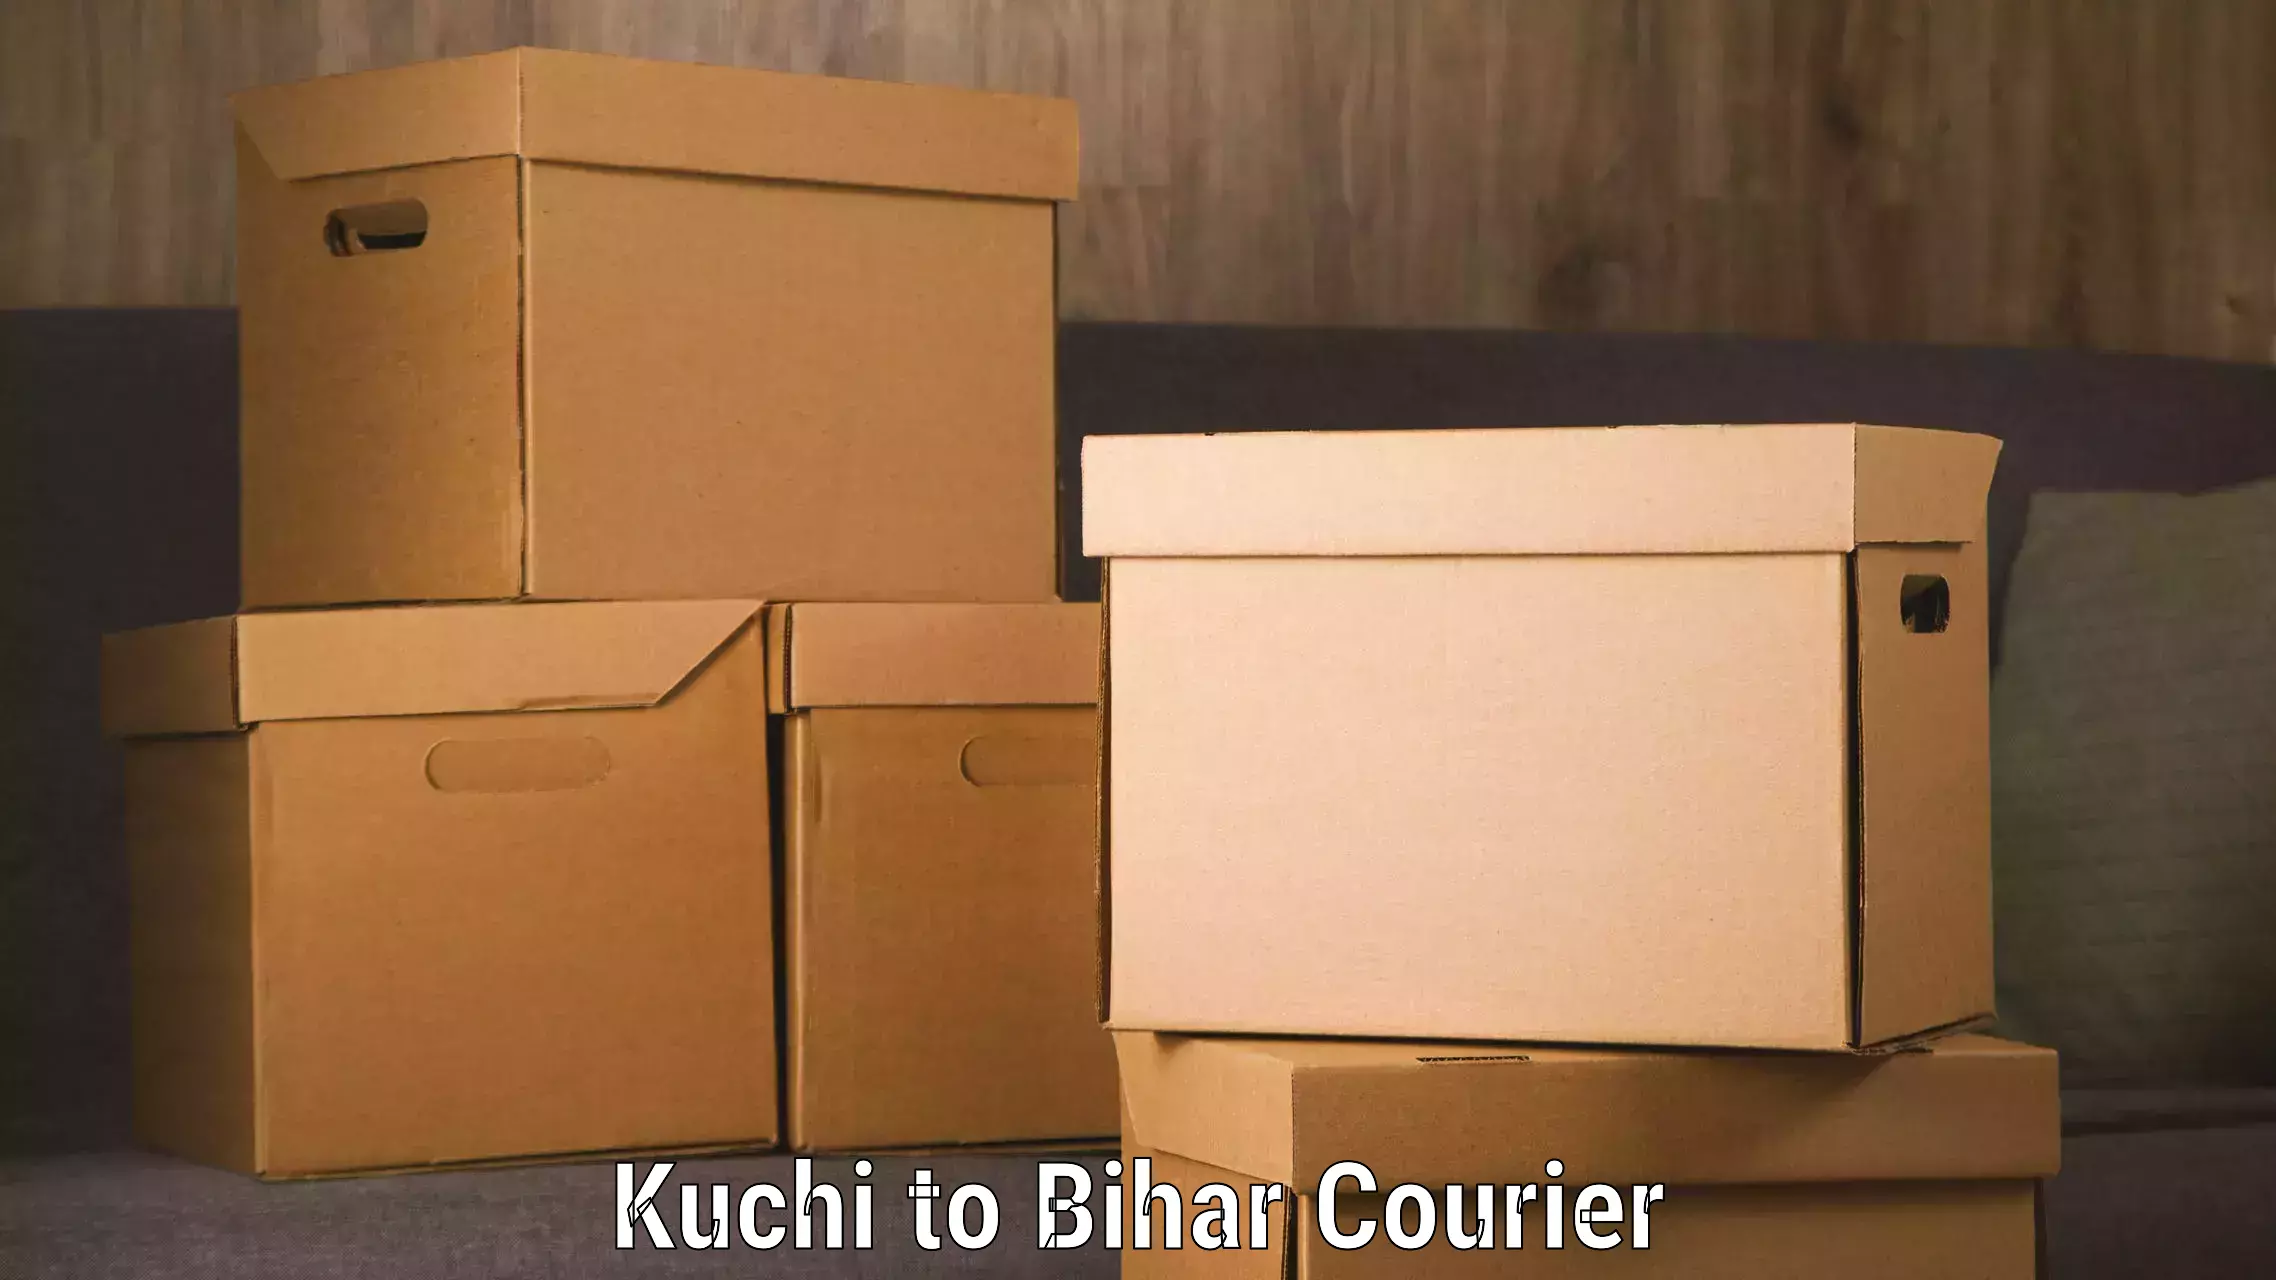 Full-service courier options Kuchi to Parsauni